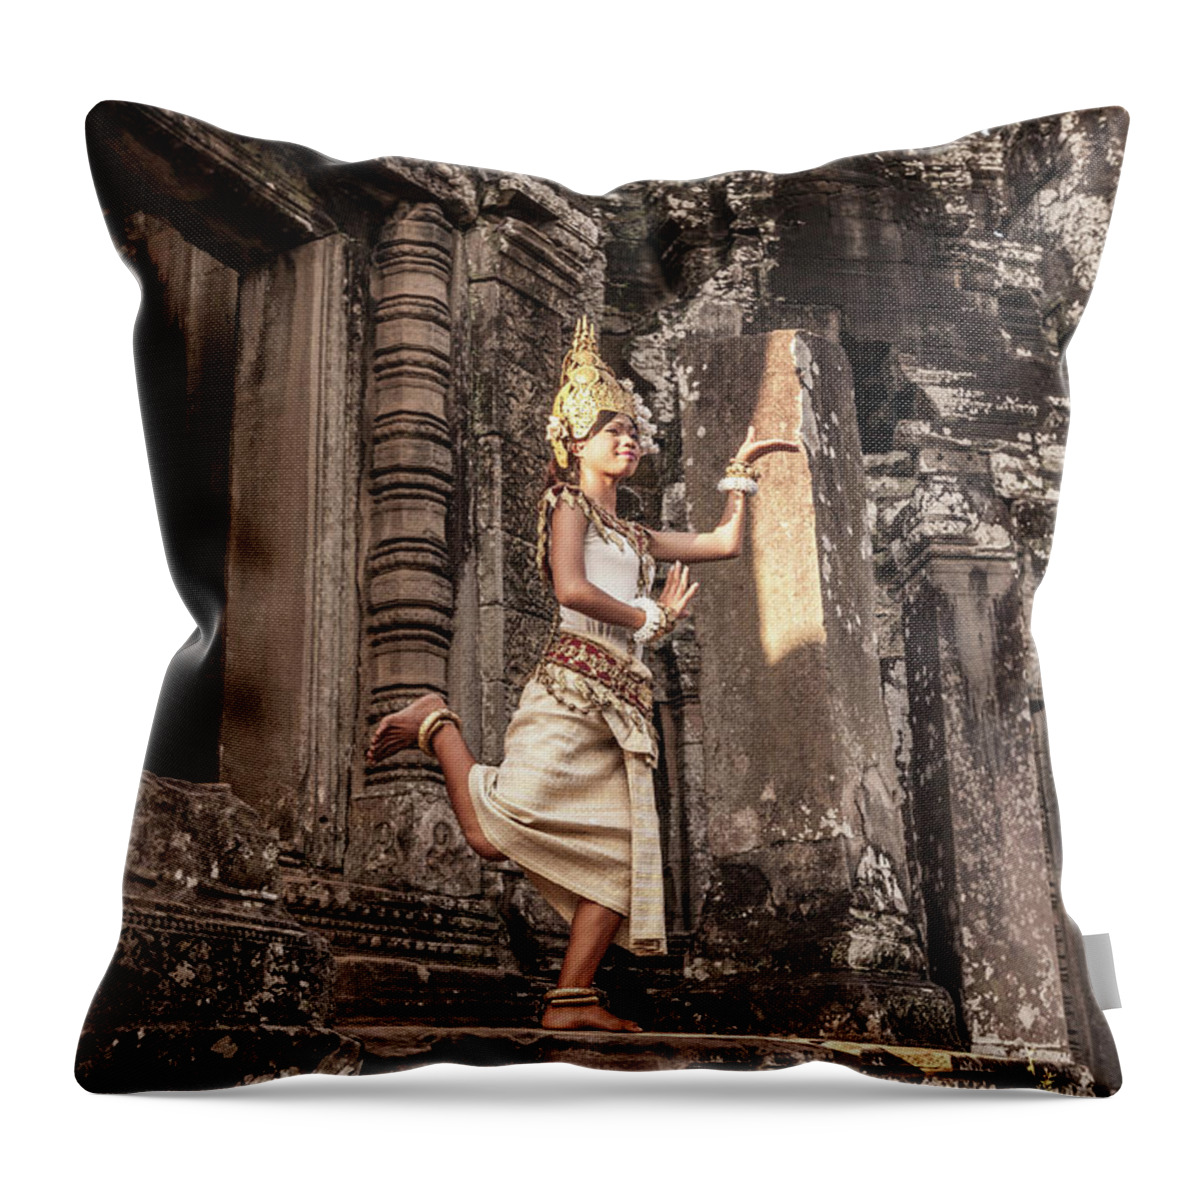 Hinduism Throw Pillow featuring the photograph Female Apsara Dancer, Standing On One by Cultura Exclusive/gary Latham